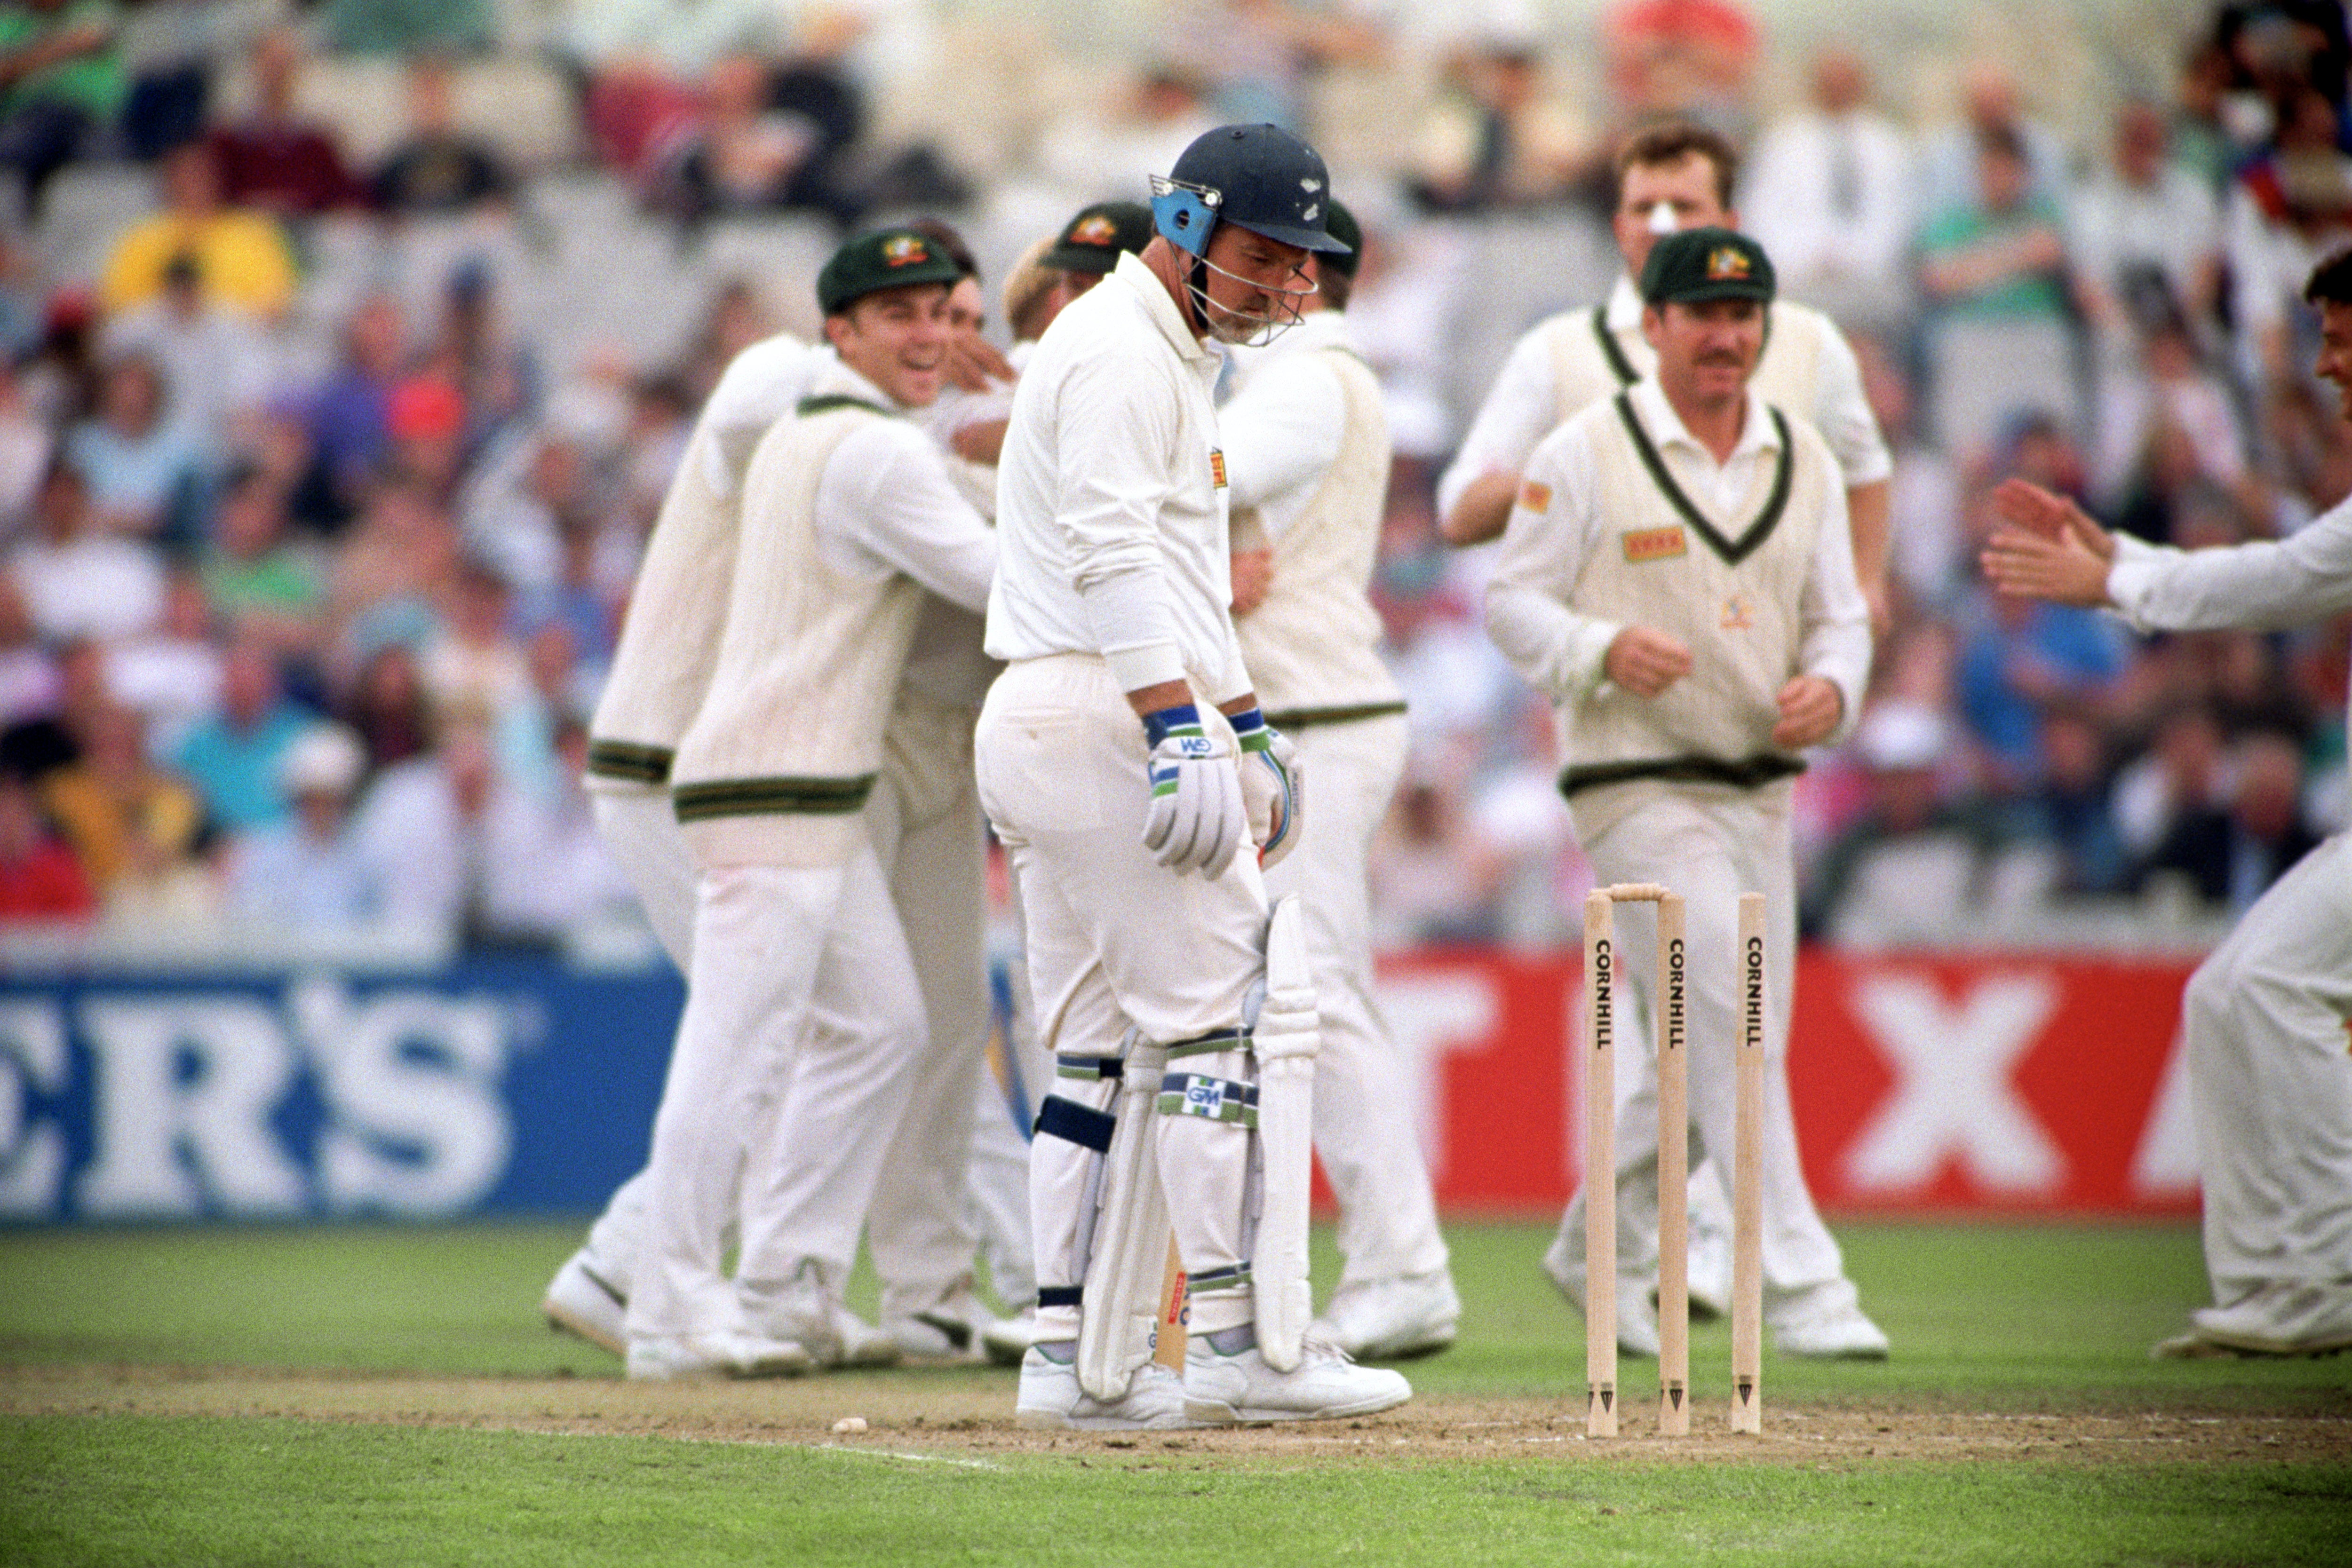 England’s Mike Gatting (centre) is stunned after being bowled by Shane Warne’s ‘ball of the century’ at Old Trafford.